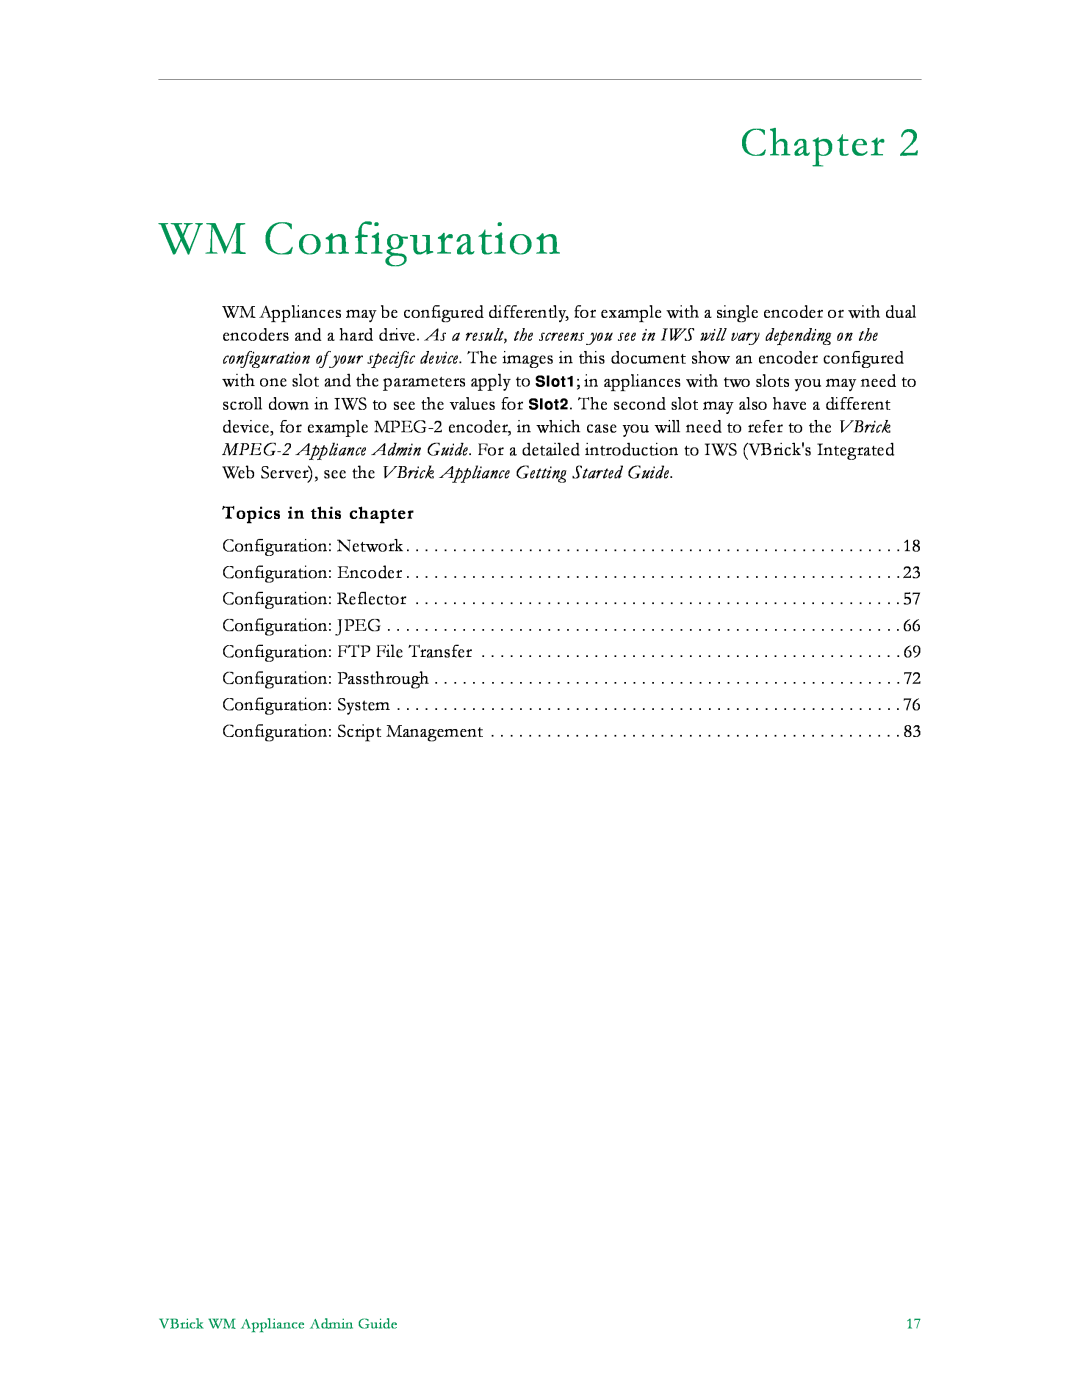 VBrick Systems VB6000, VB4000, VB5000 manual WM Configuration, Chapter, Topics in this chapter 